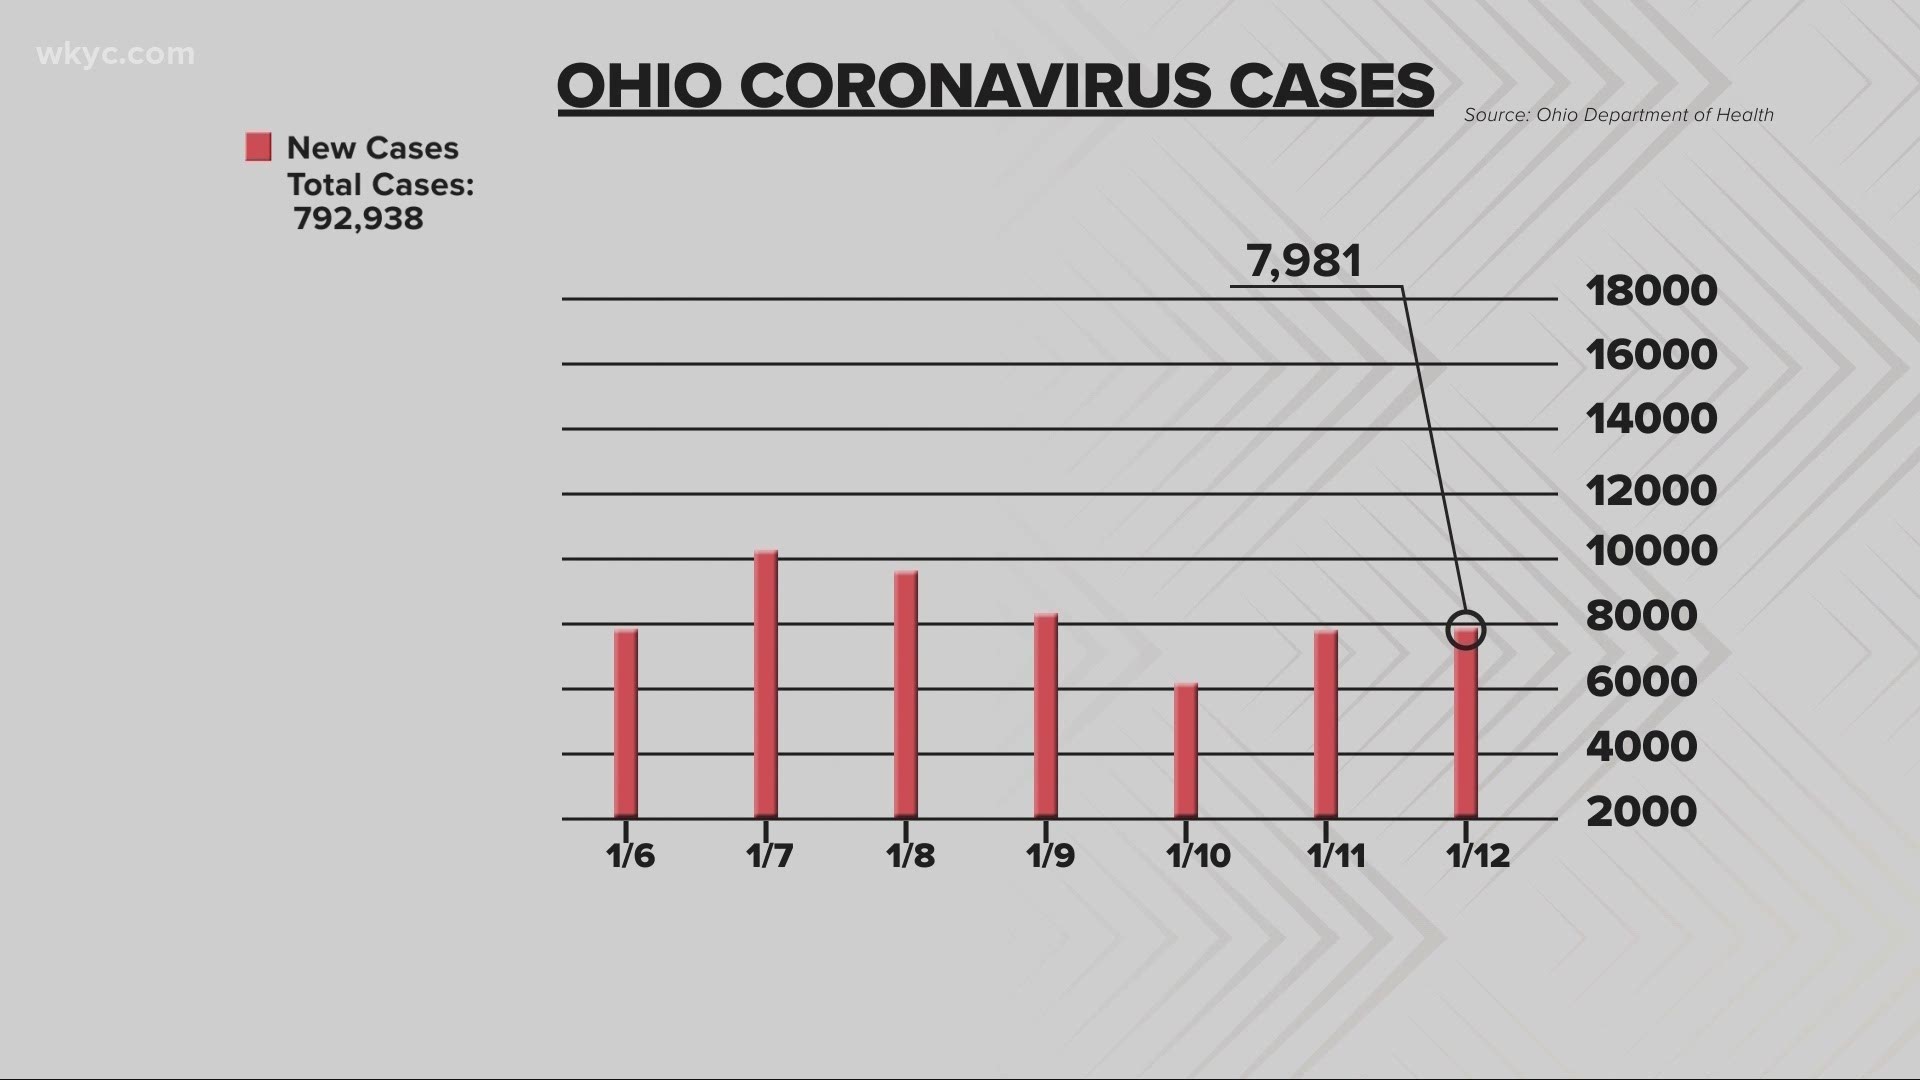 Ohio Health Department is reporting 7,981 new cases in the last 24-hours. There were also 100 new deaths.